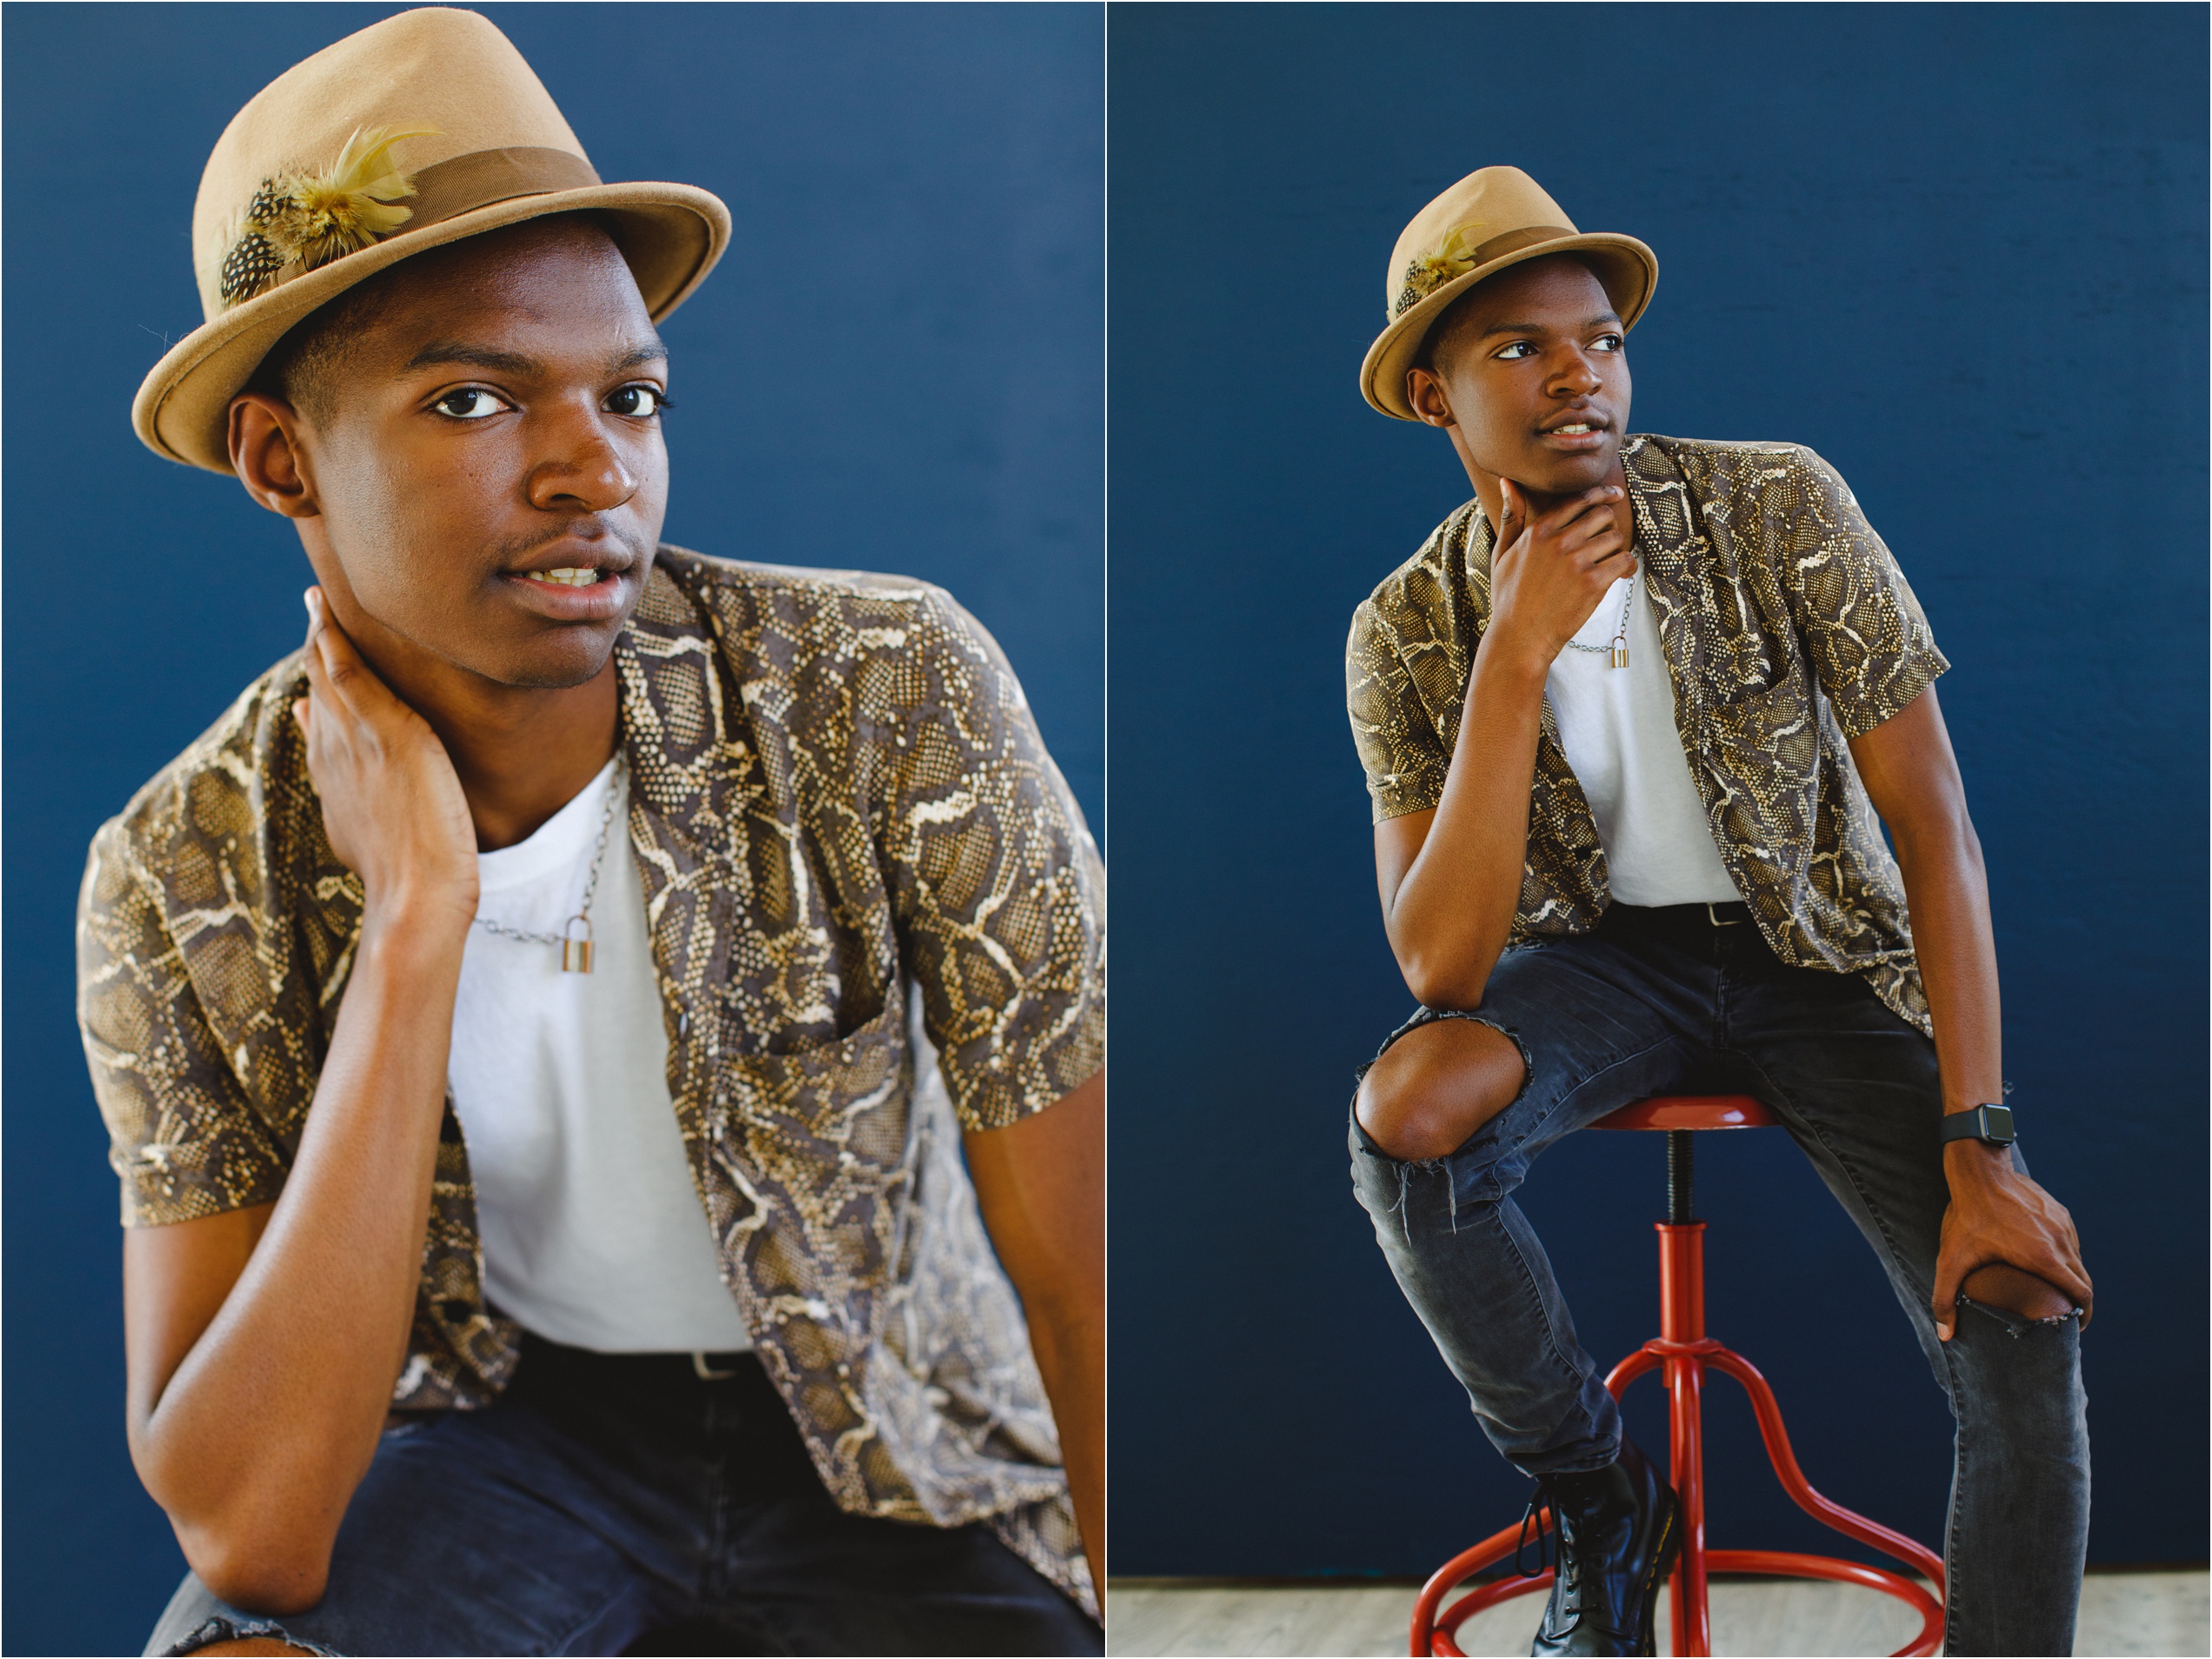 Akiva poses in items from the slice of lime style closet during his photography studio session for his senior boy pictures